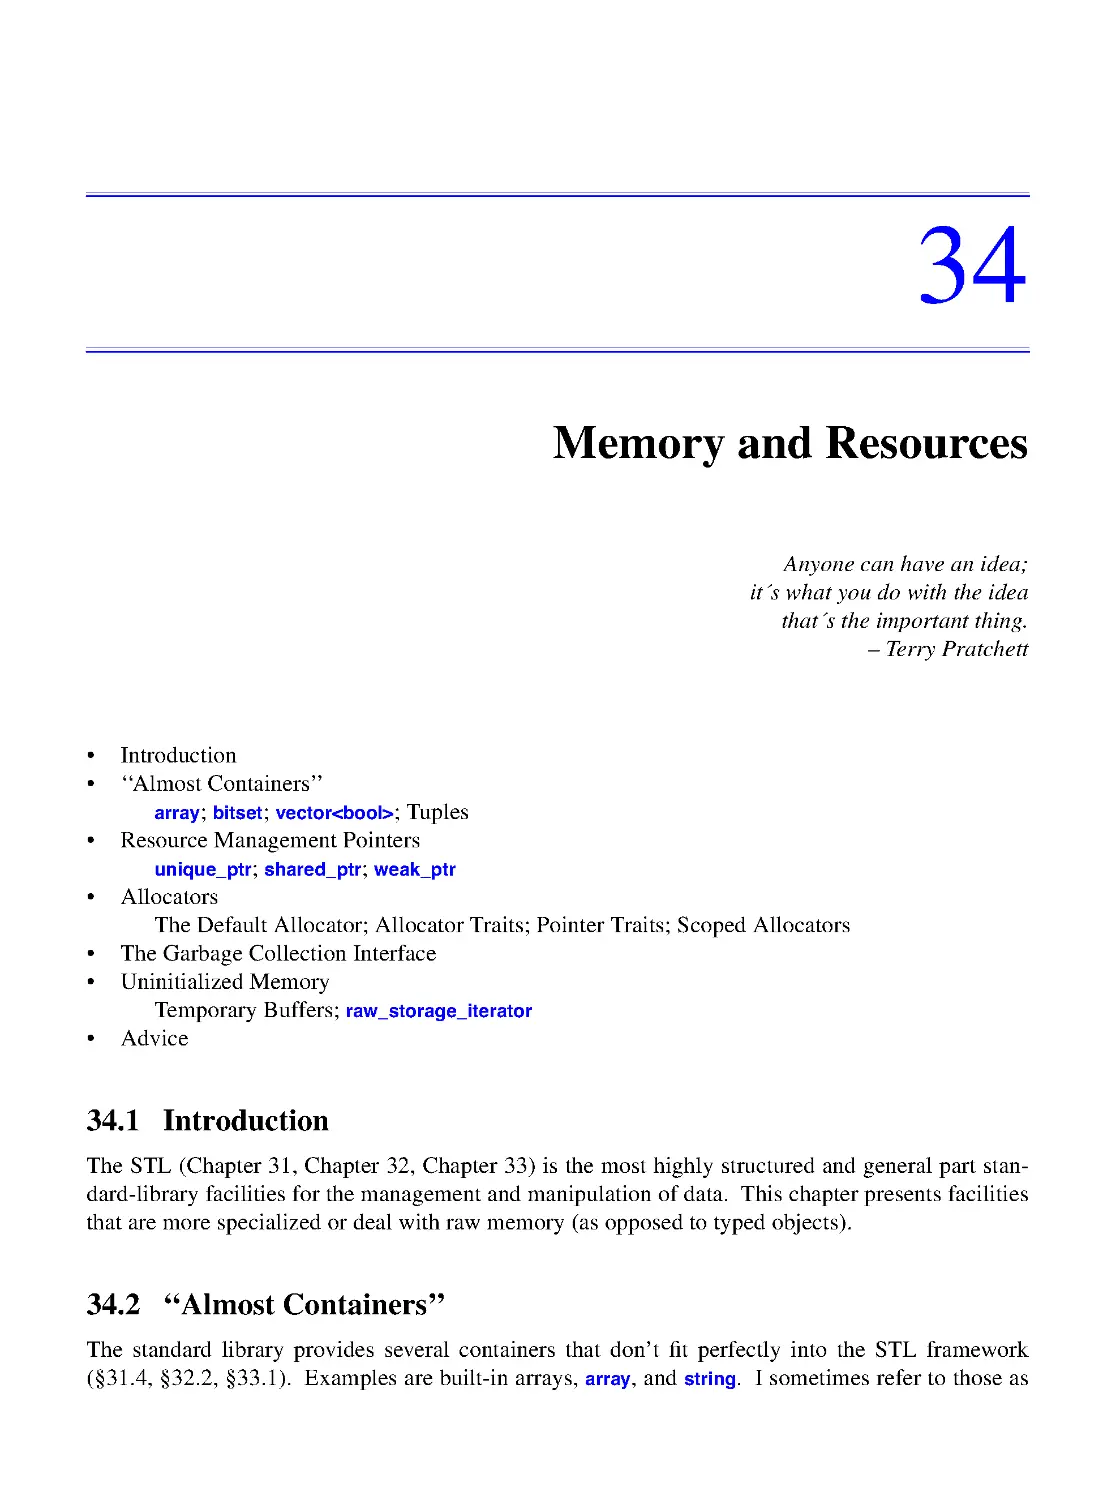 34. Memory and Resources